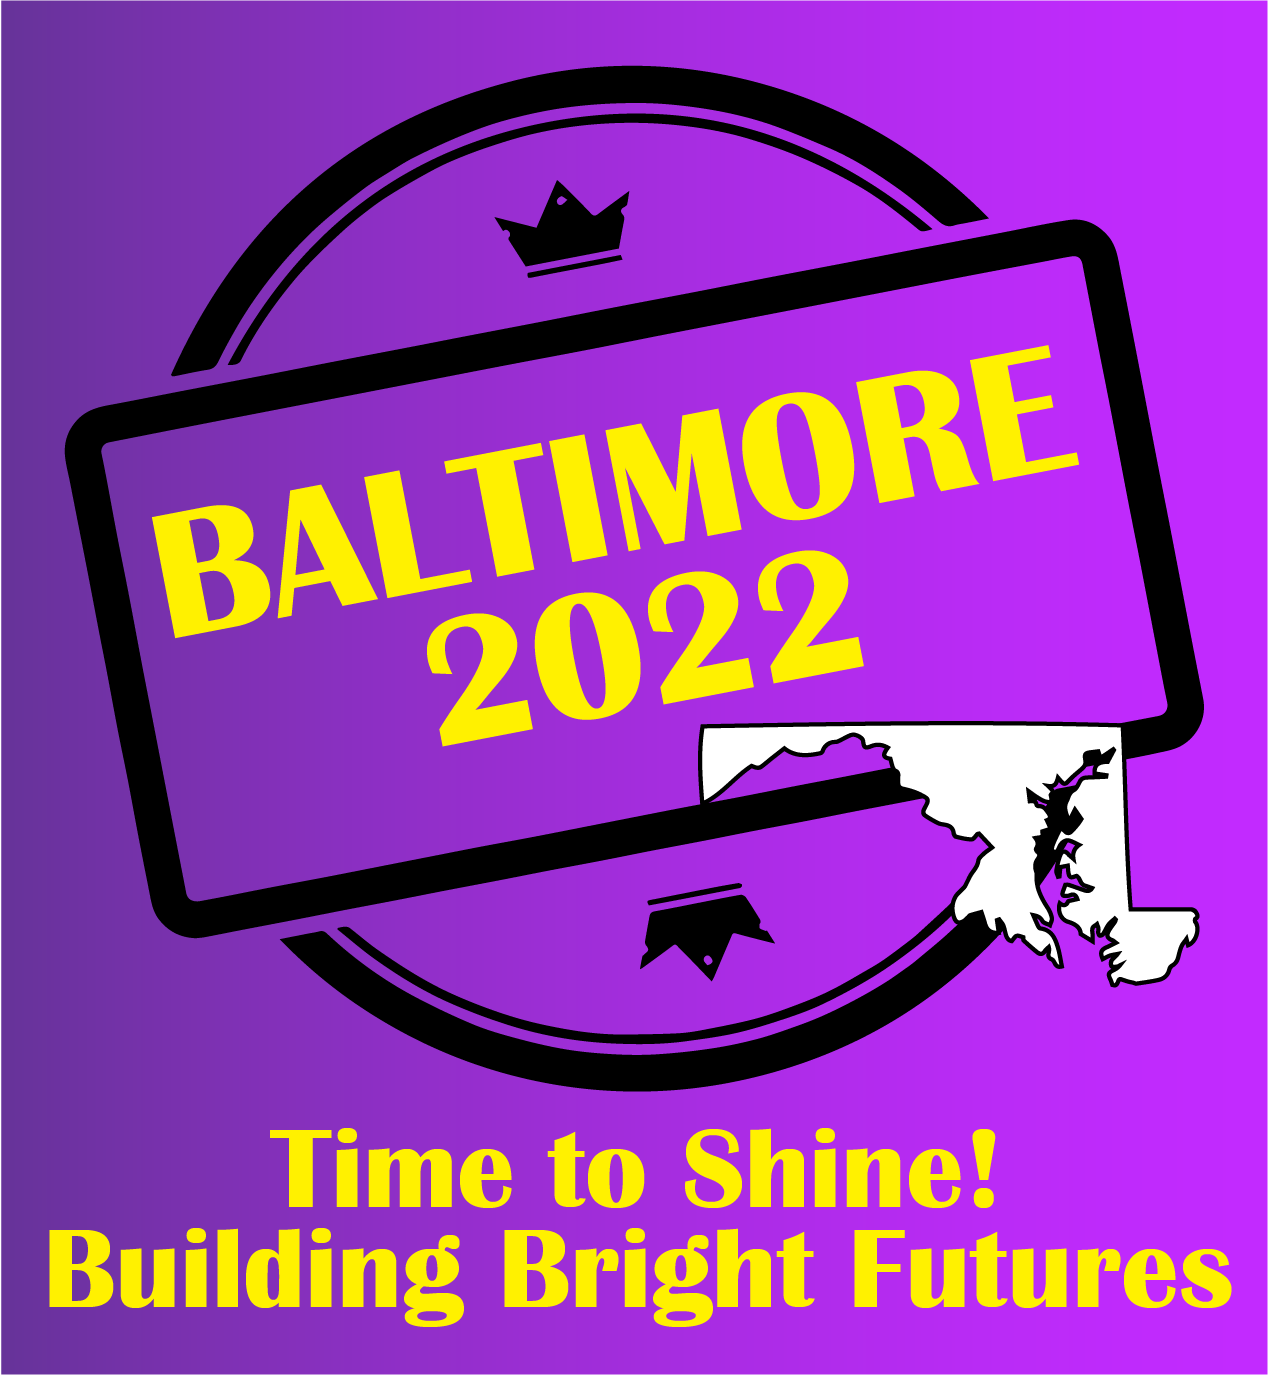 Image for Time to Shine! Building Bright Futures - Baltimore